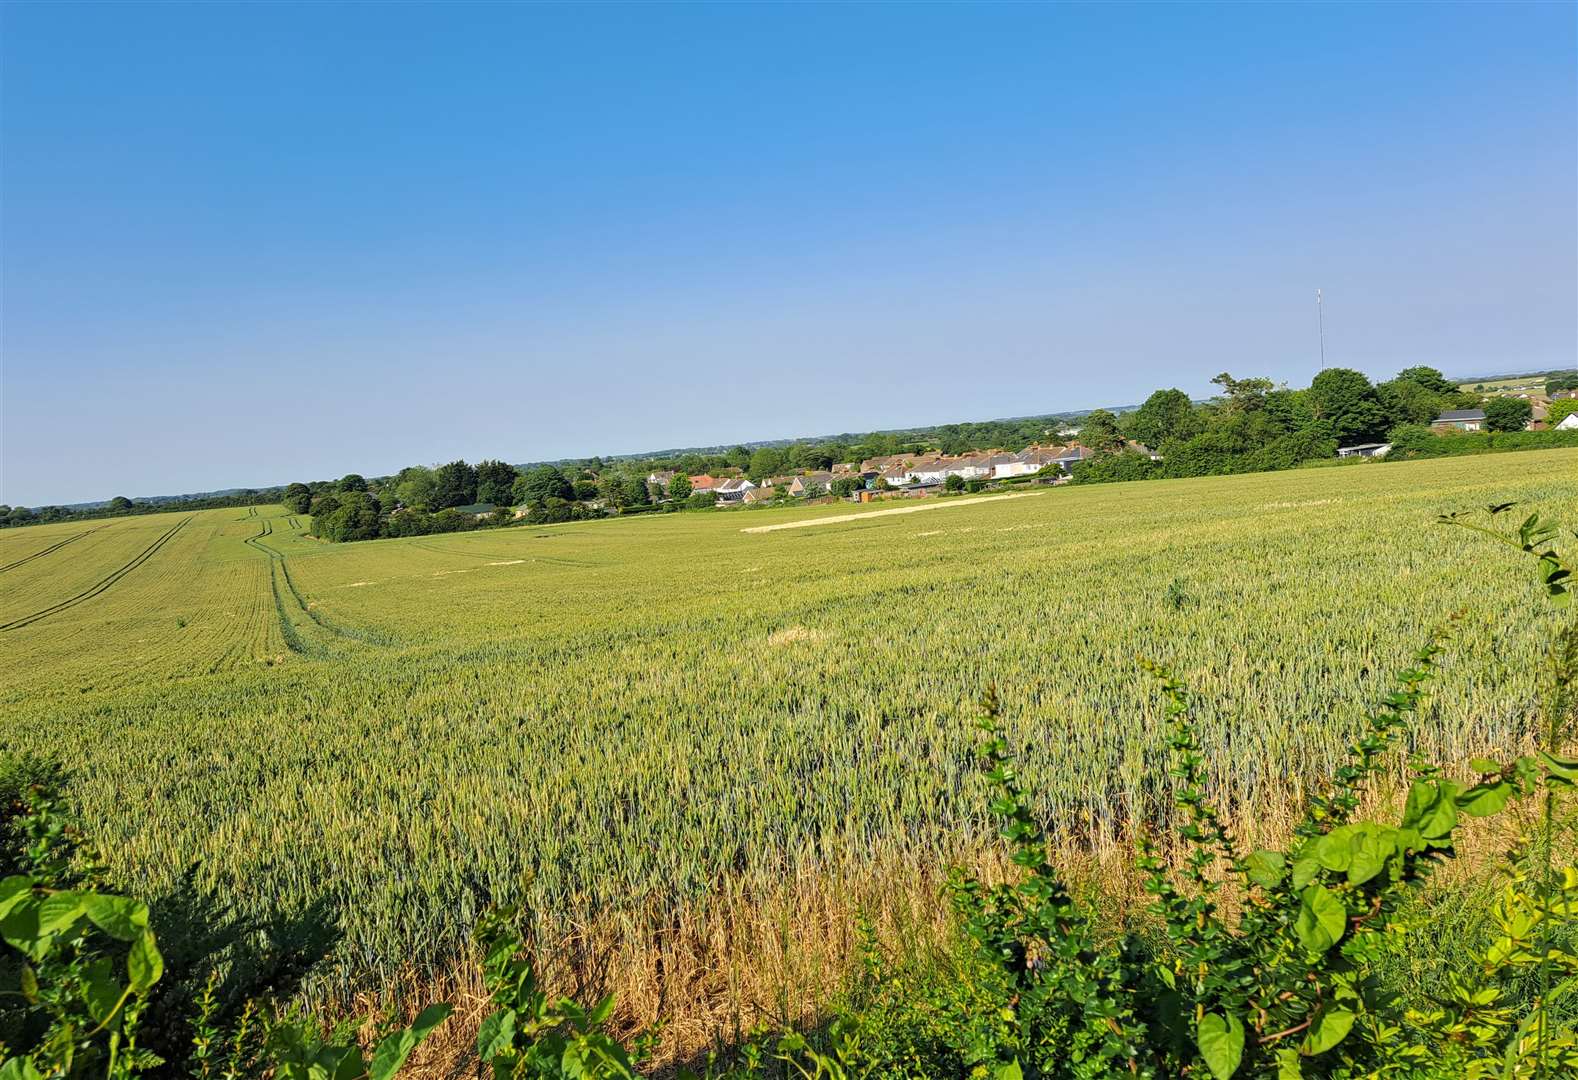 The development is planned for this farmland at Cauldham Lane, Capel-le-Ferne. Houses at Capel Street, on the other side of the planned estate, can be seen in the distance